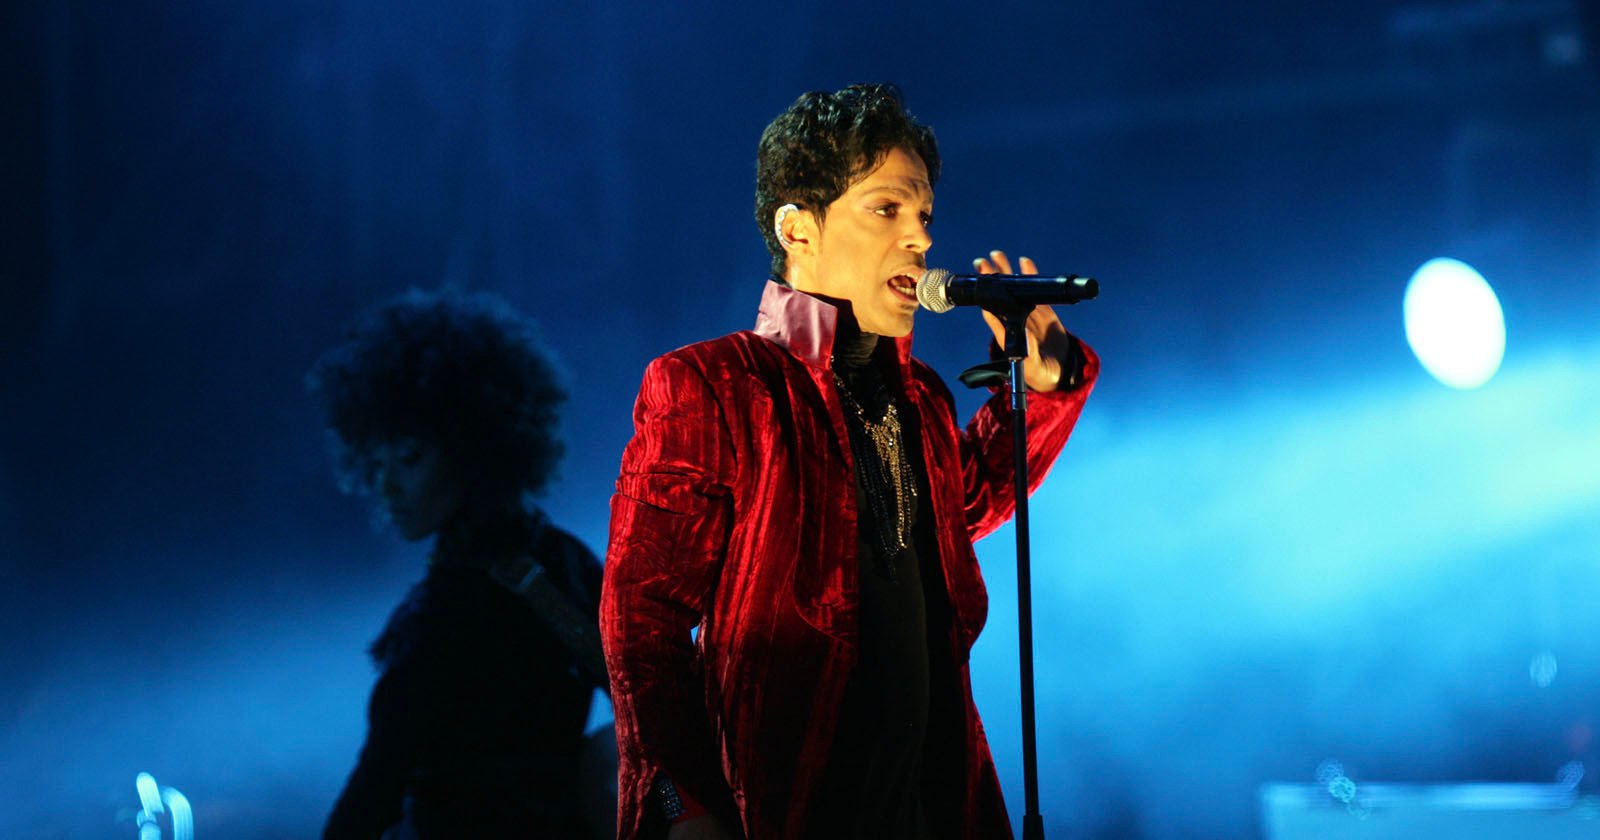  prince personal photographer claims were stolen from him 